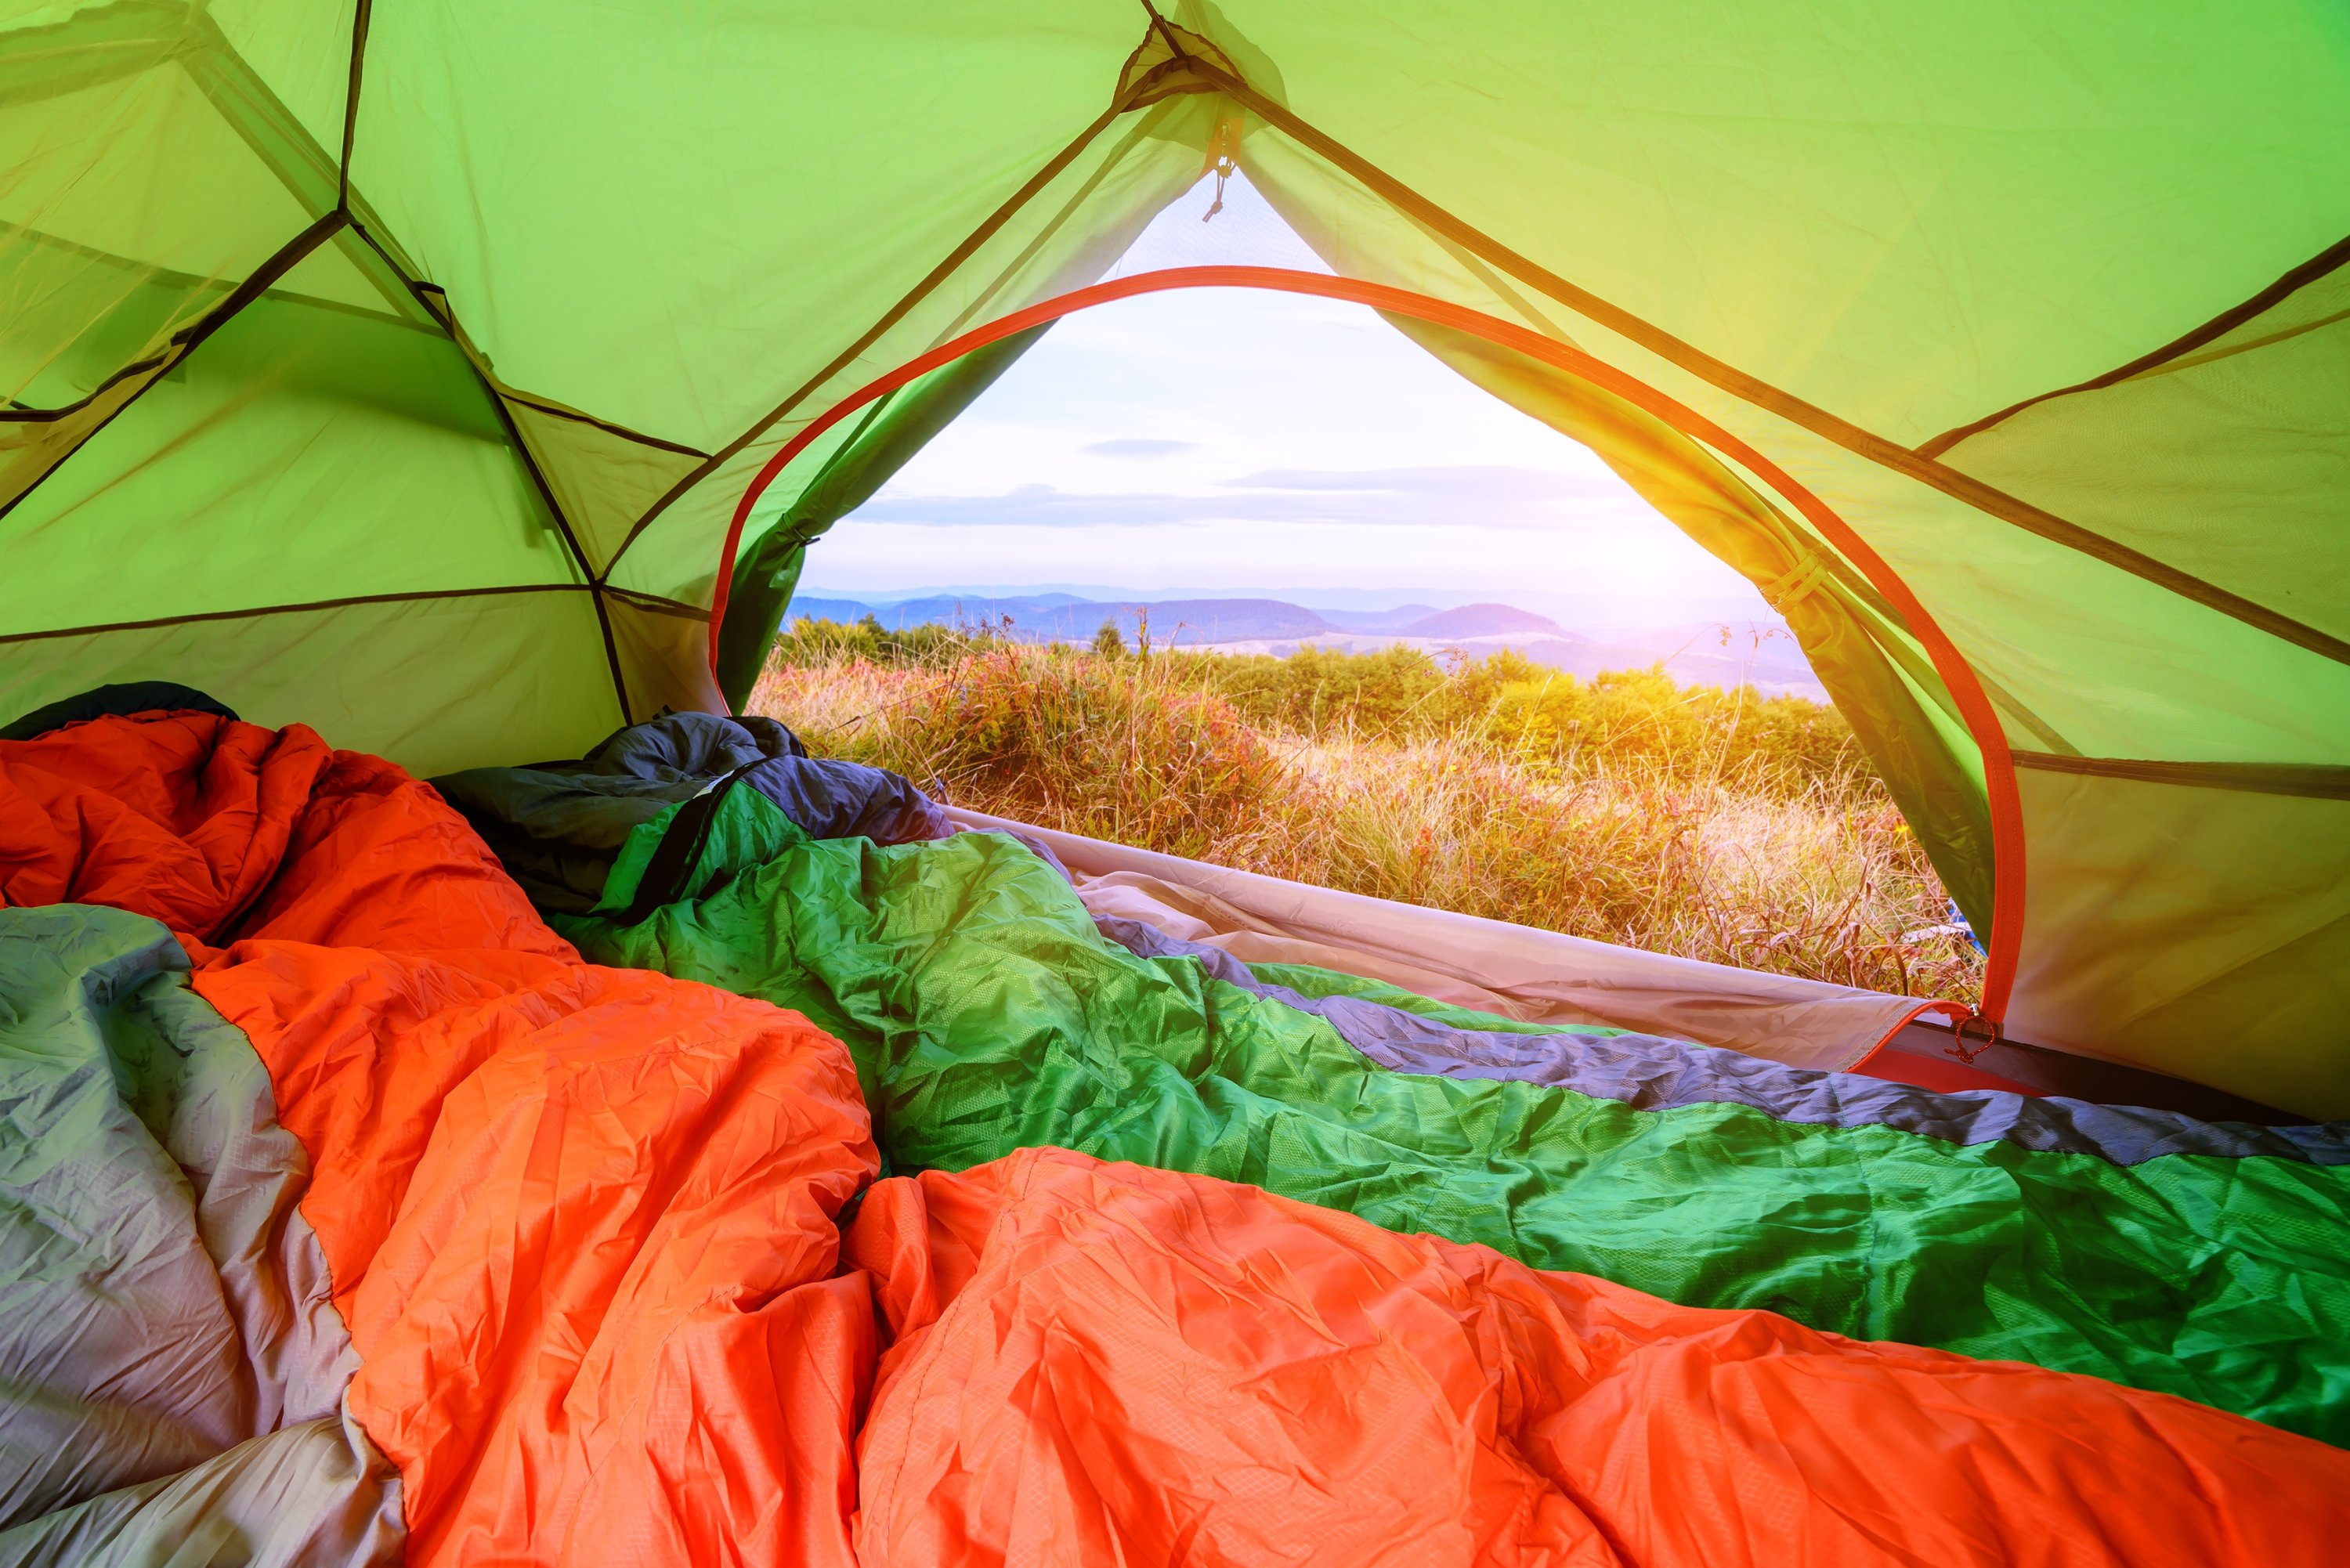 Make sure you choose the correct tent and sleeping bag to fit the weather conditions. (iStock Photo)